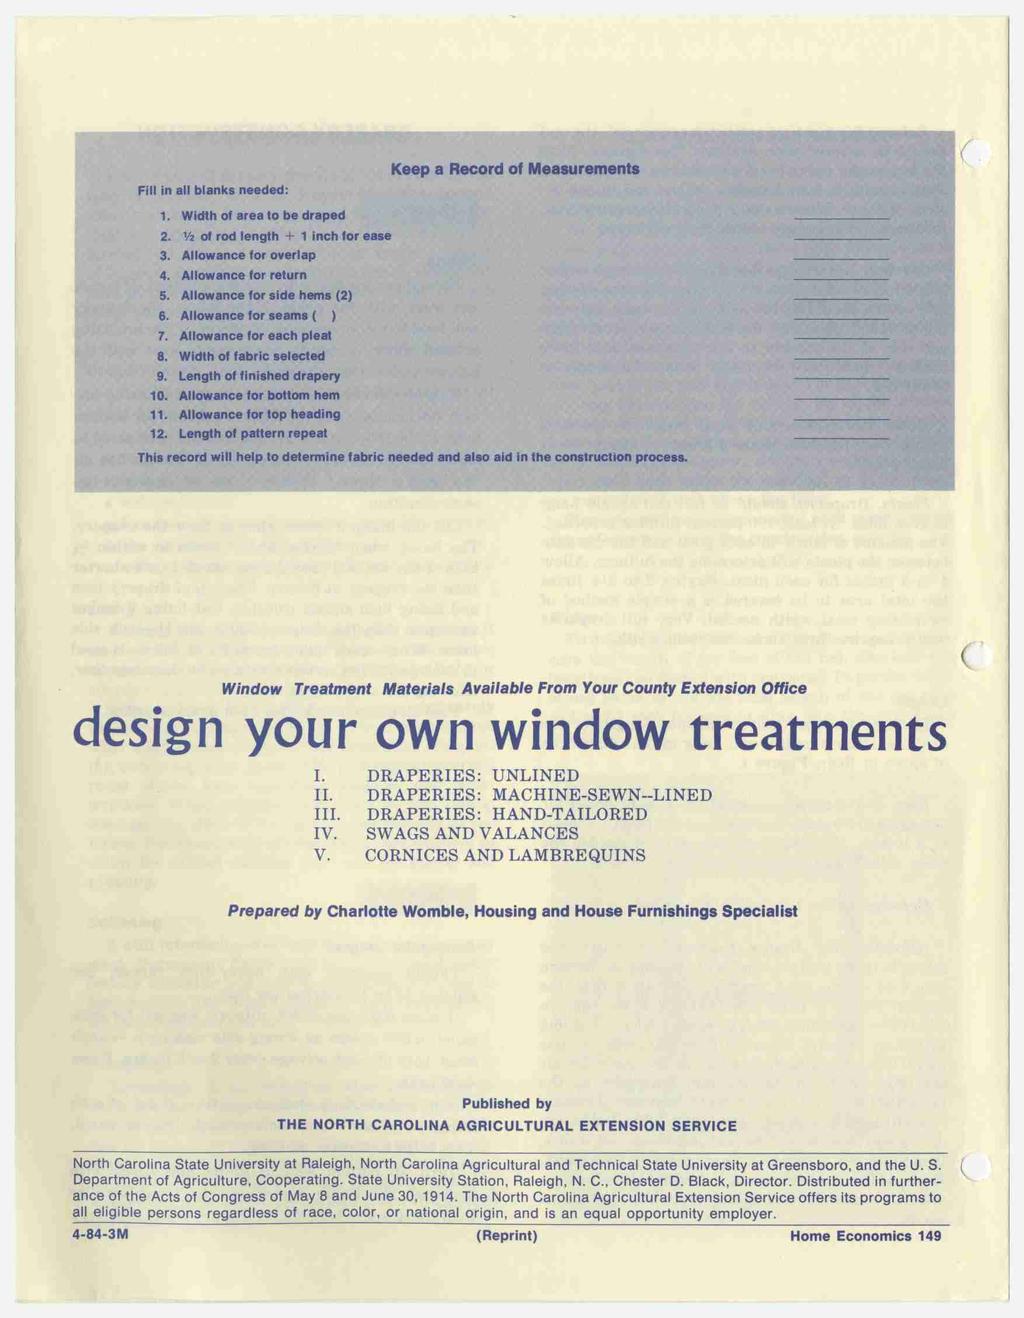 n. Window Treatment Materials Available From Your County Extension Office ce..< 5 4. -1cu g w-vfi-i t«r-. A ; ~.' -._I- design your own window treatments DRAPERIES: UNLINED II.